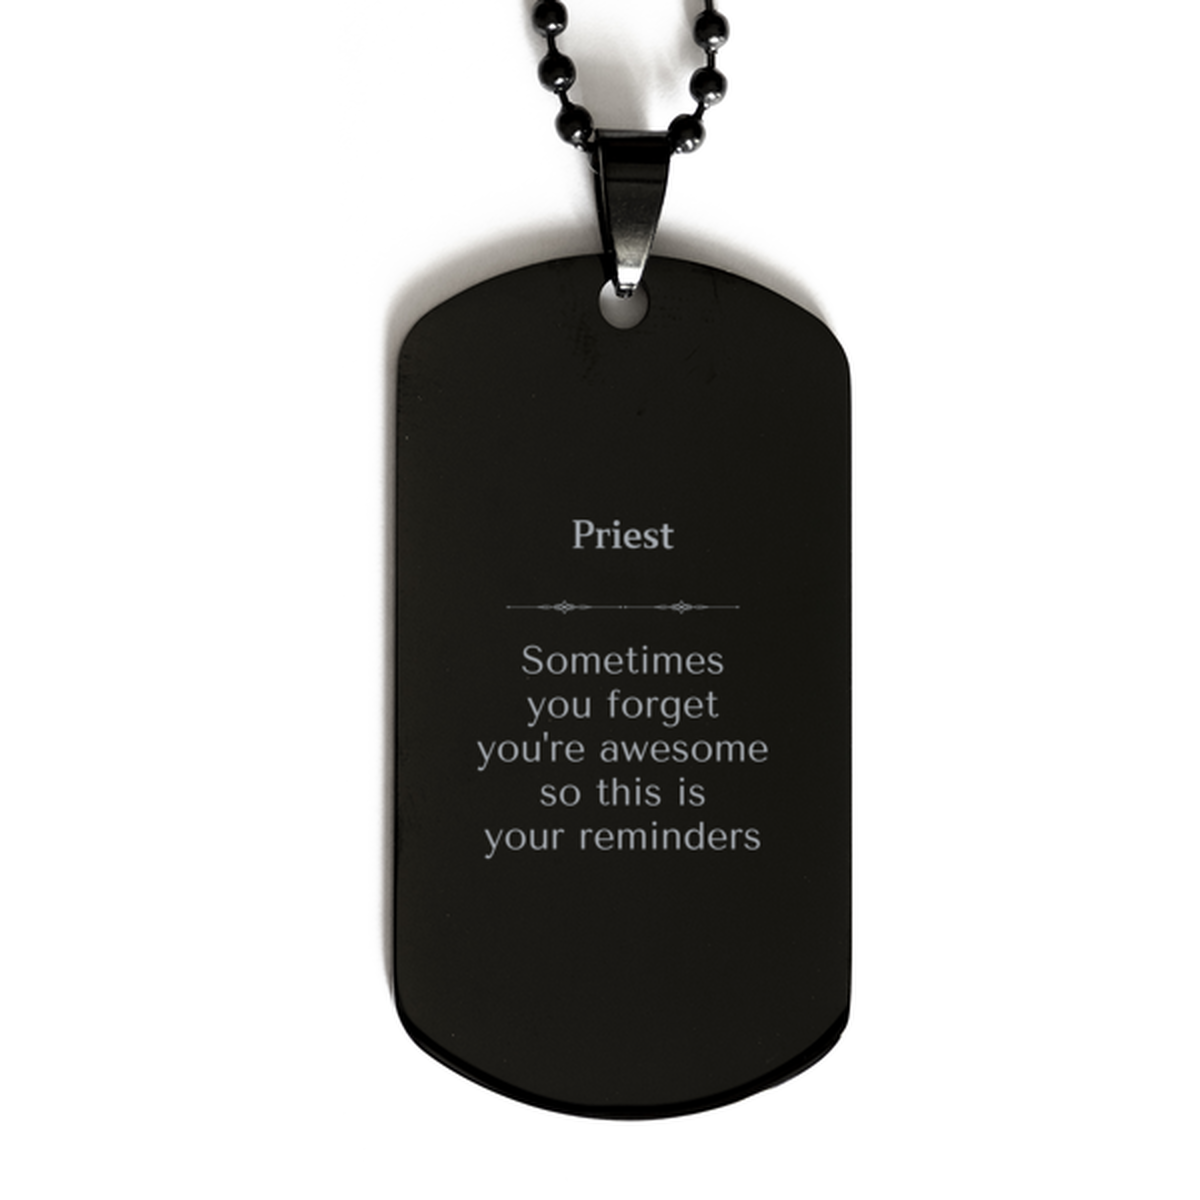 Sentimental Priest Black Dog Tag, Priest Sometimes you forget you're awesome so this is your reminders, Graduation Christmas Birthday Gifts for Priest, Men, Women, Coworkers